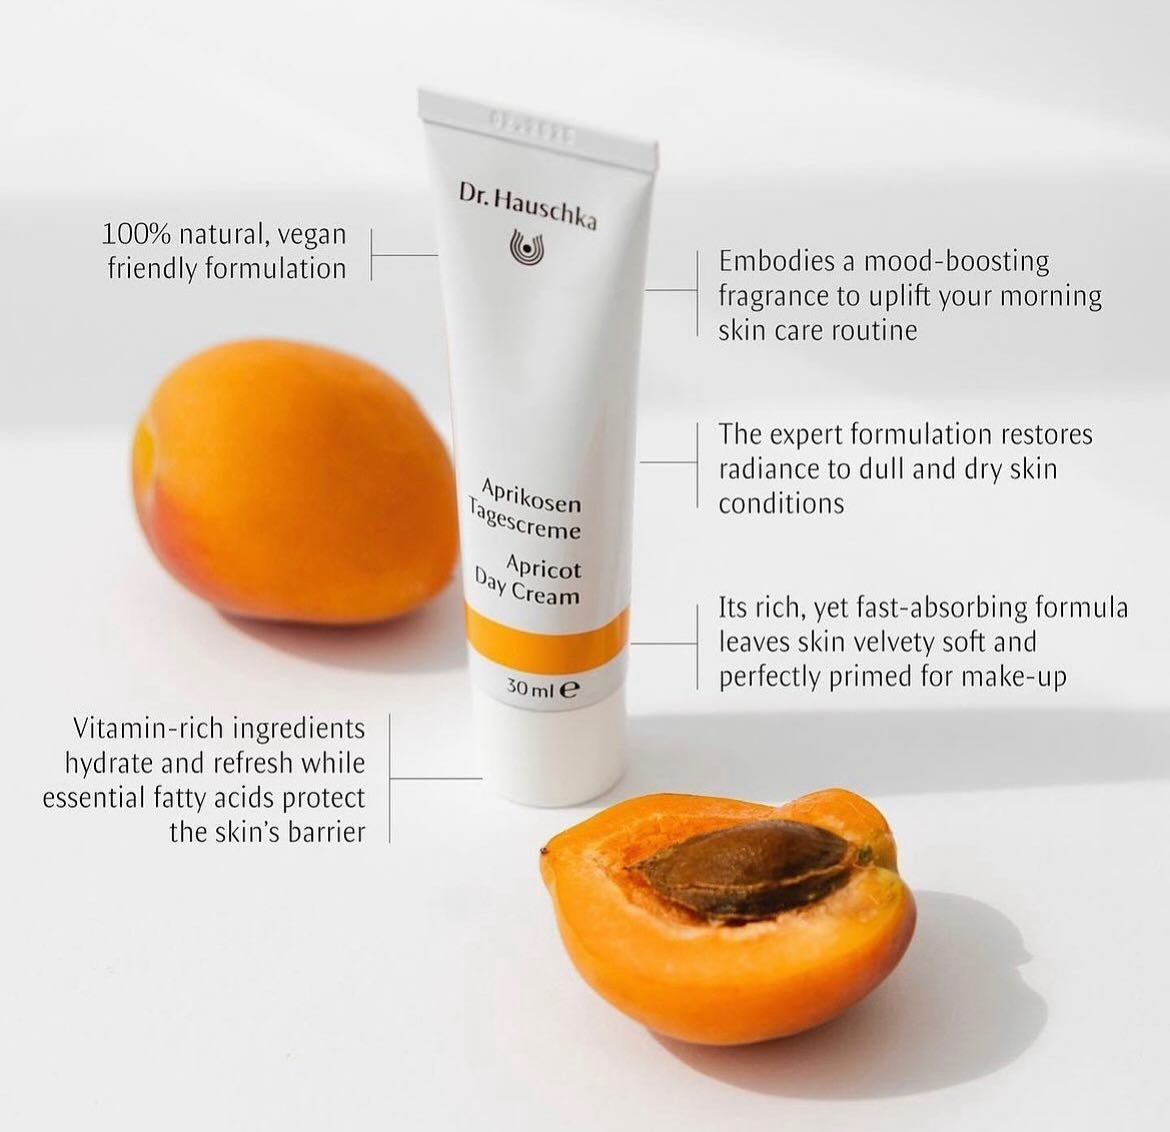 Say hello to Dr. Hauschka&rsquo;s
new Apricot Day Cream 👋 Brings radiance to dry, dull skin whilst nourishing &amp; helping your skin to retain moisture.

20% Discount off Dr. Hauschka Skin Care, Body Care and Makeup use code HAUSCHKA20

Save 10% on